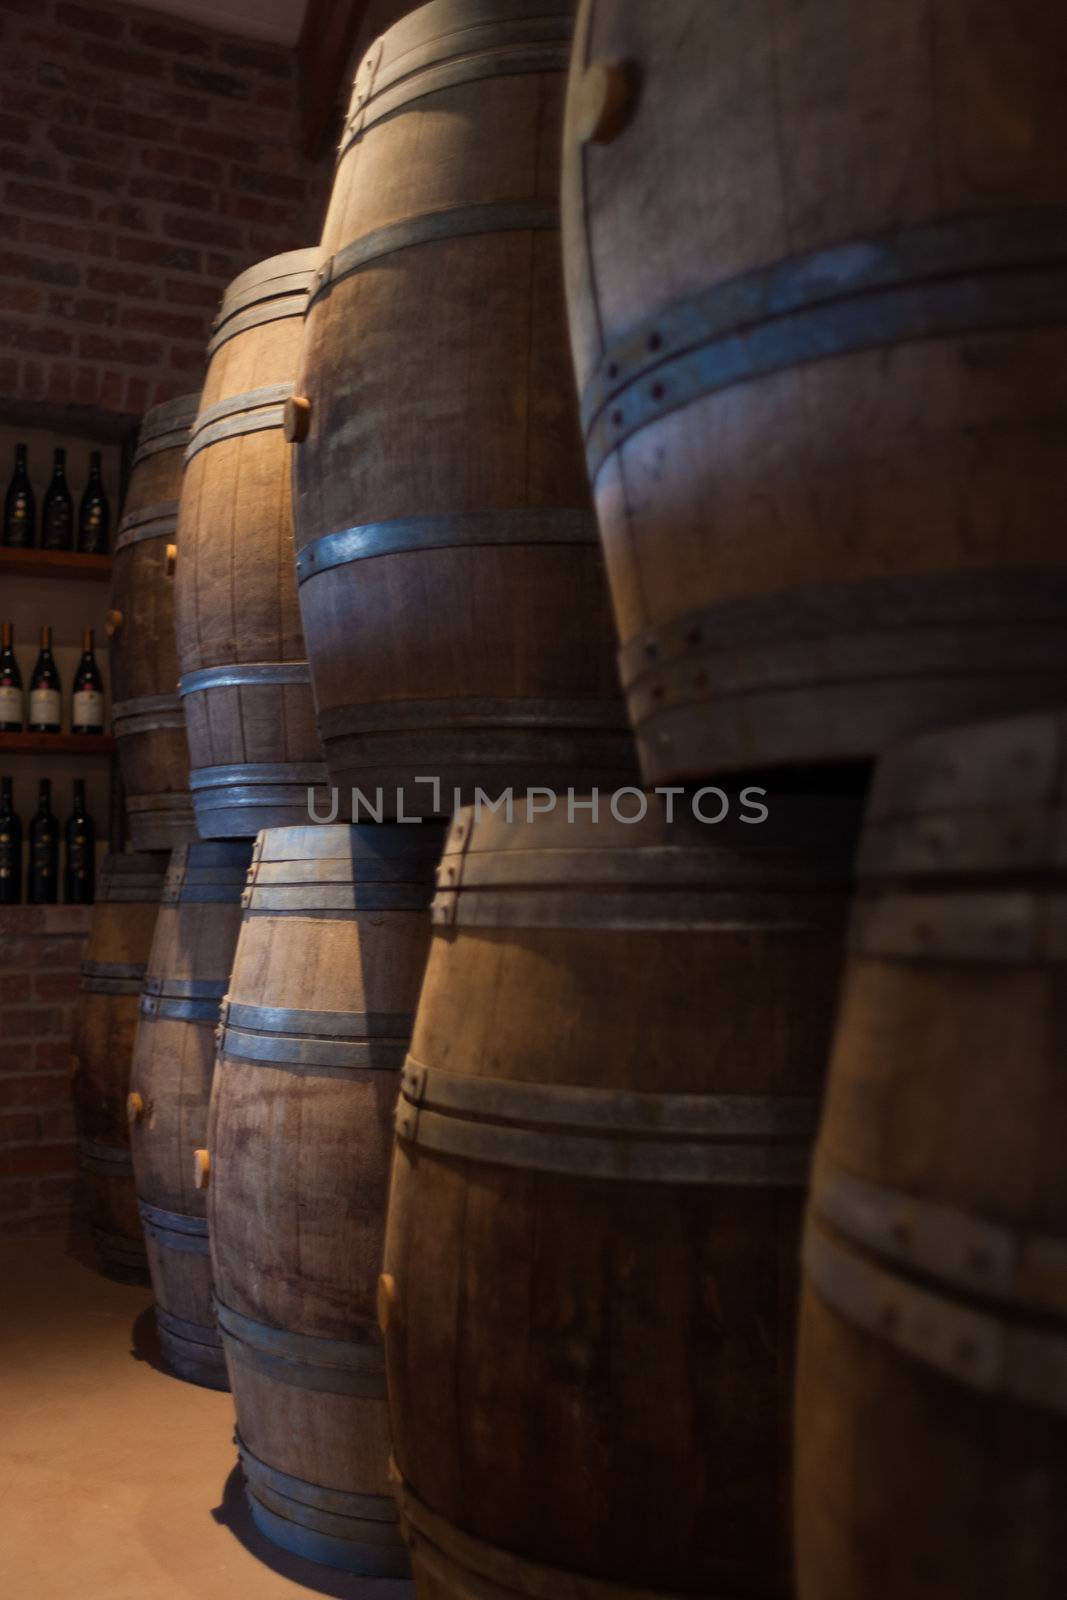 Barrels of South African wine stacked for sale